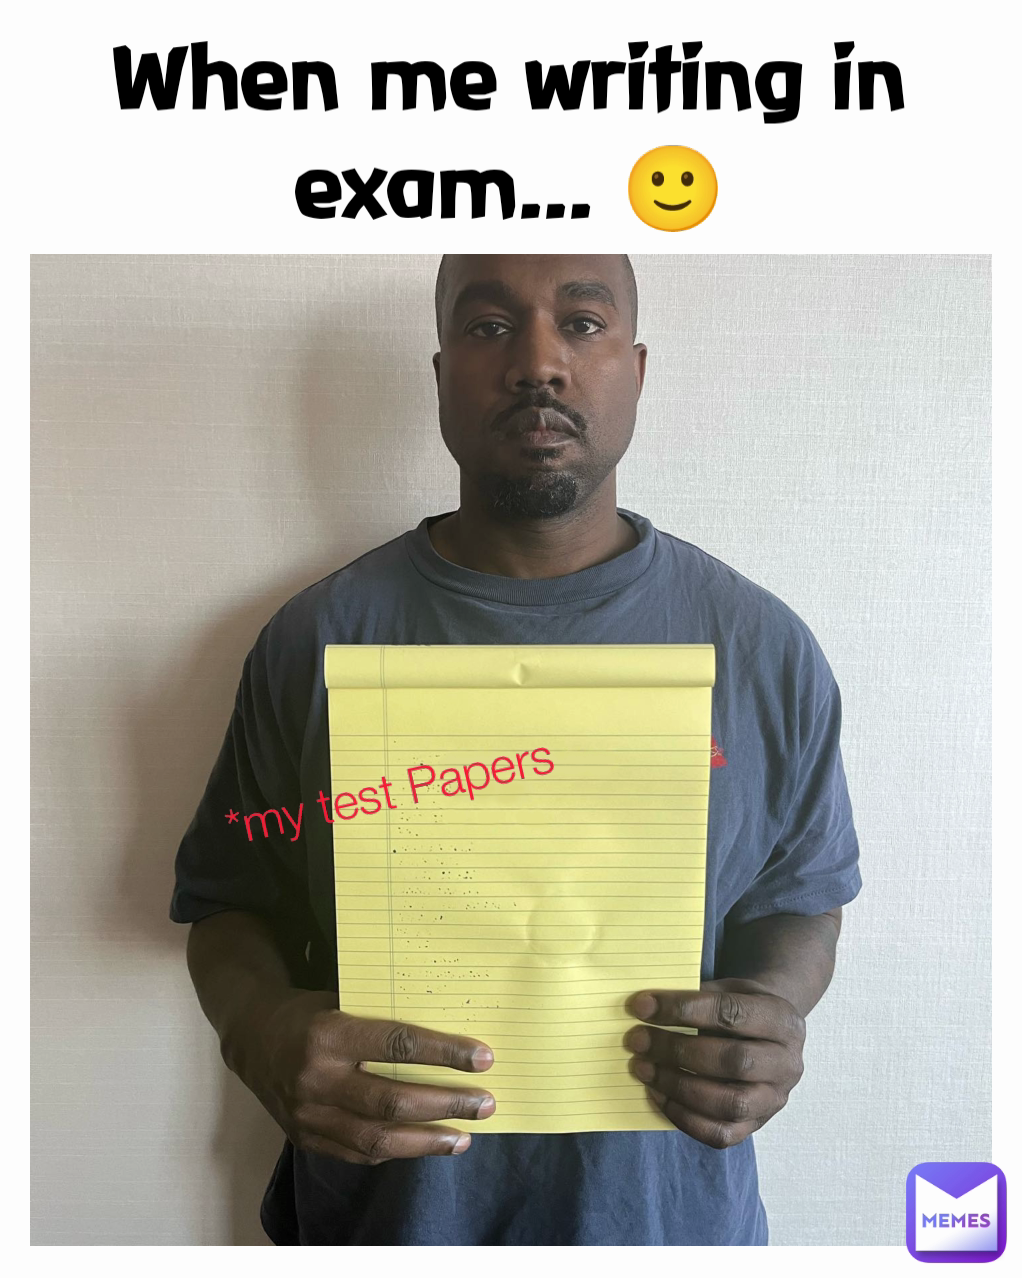 done with exams meme